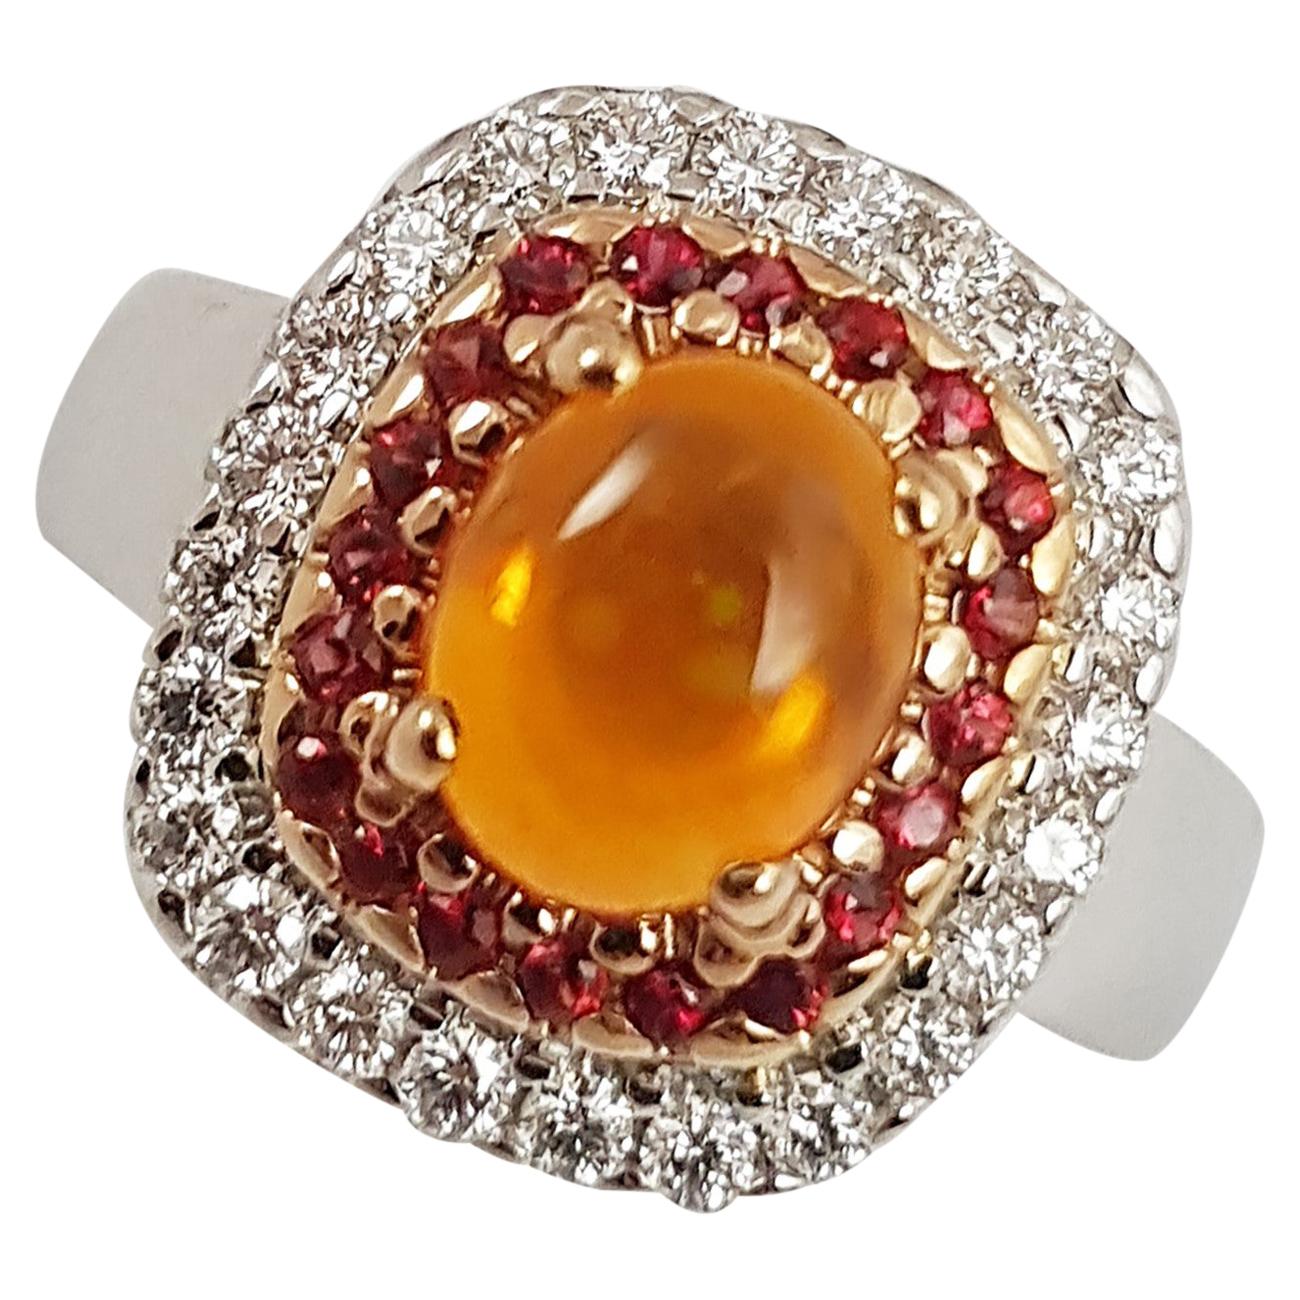 Fire Opal with Orange Sapphire and Diamond Ring Set in 18 Karat White Gold